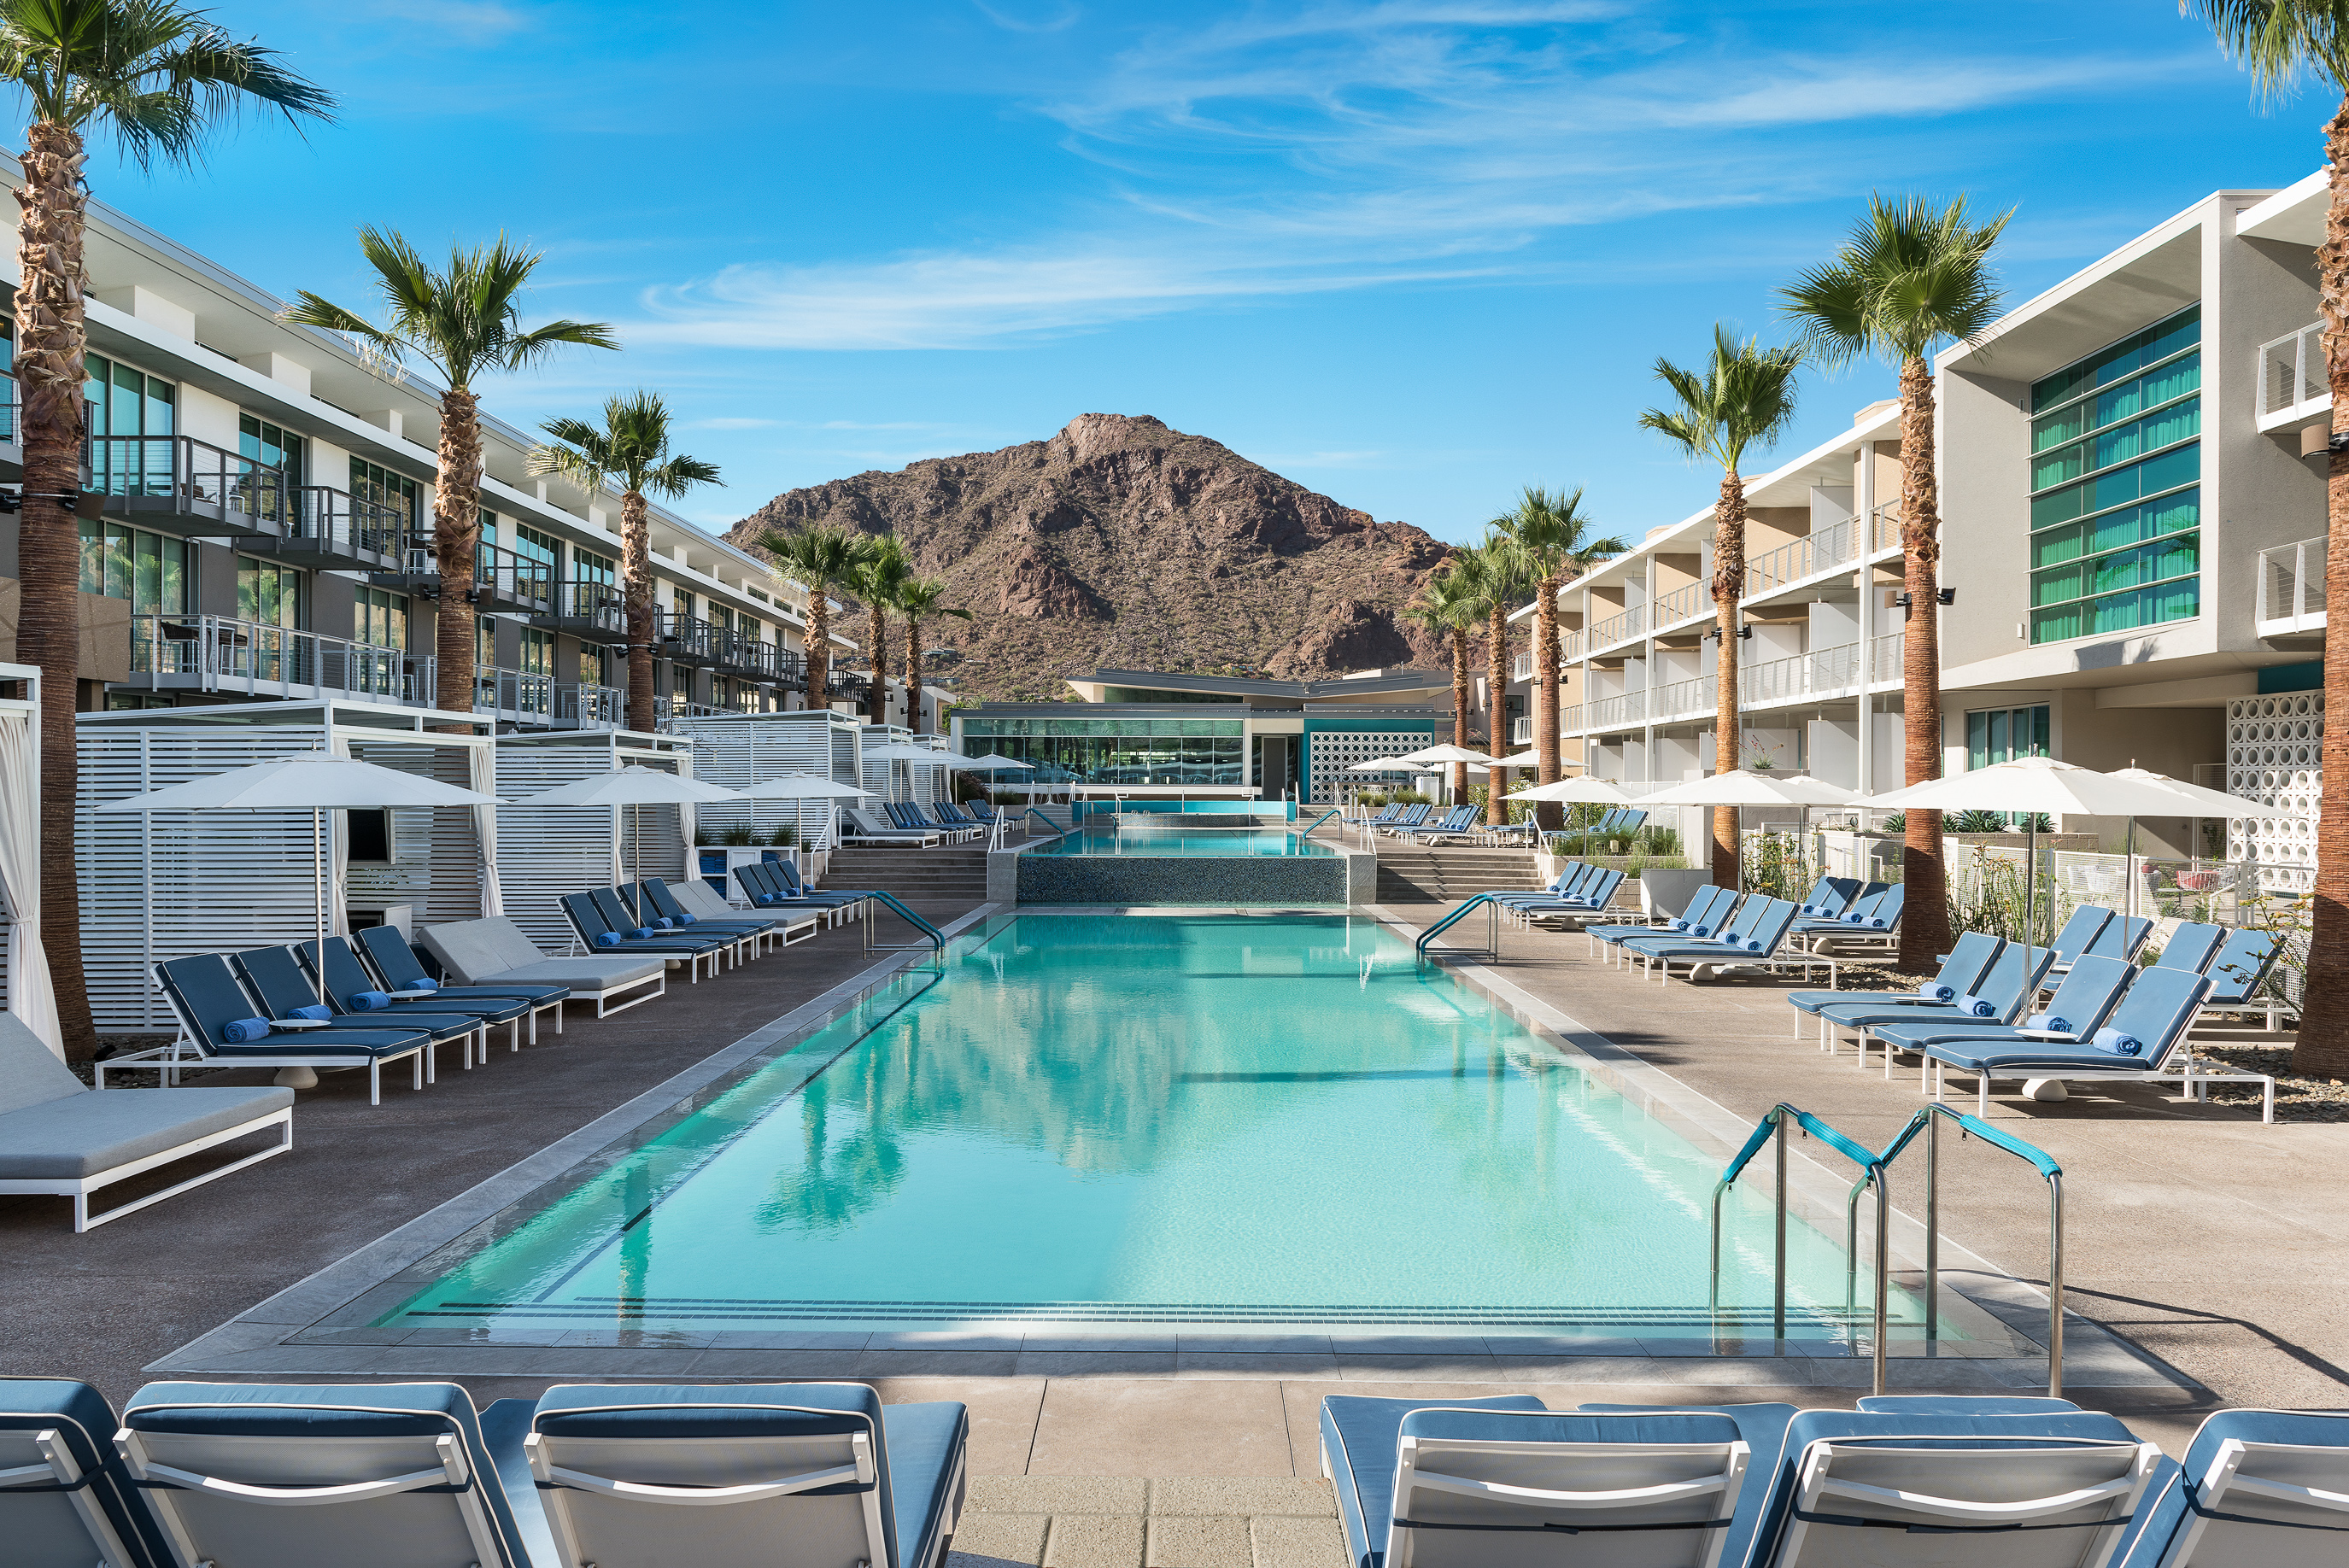 Pool Area With Lounge Chairs, Cabanas, Palm Trees, And Camelback Mountain View